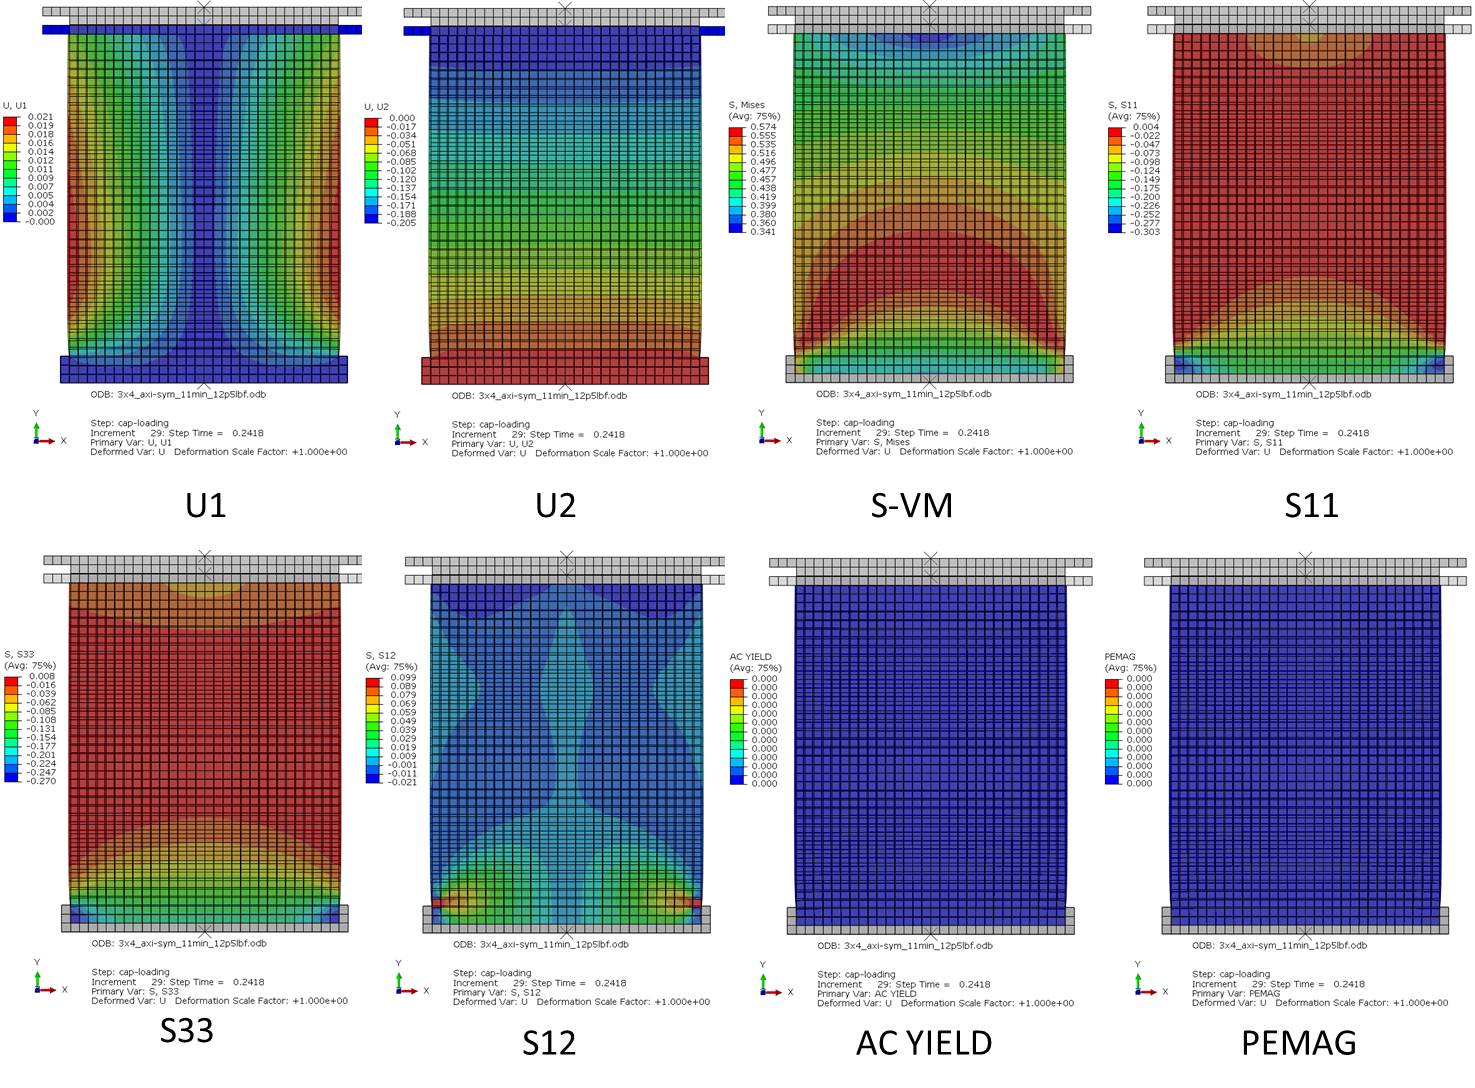 Numerical simulations of fresh mortar specimens loaded in axial compression at specific mortar maturities. The finite element analyses use the linear Drucker-Prager elasto-plastic model (Step-Time=0.24)